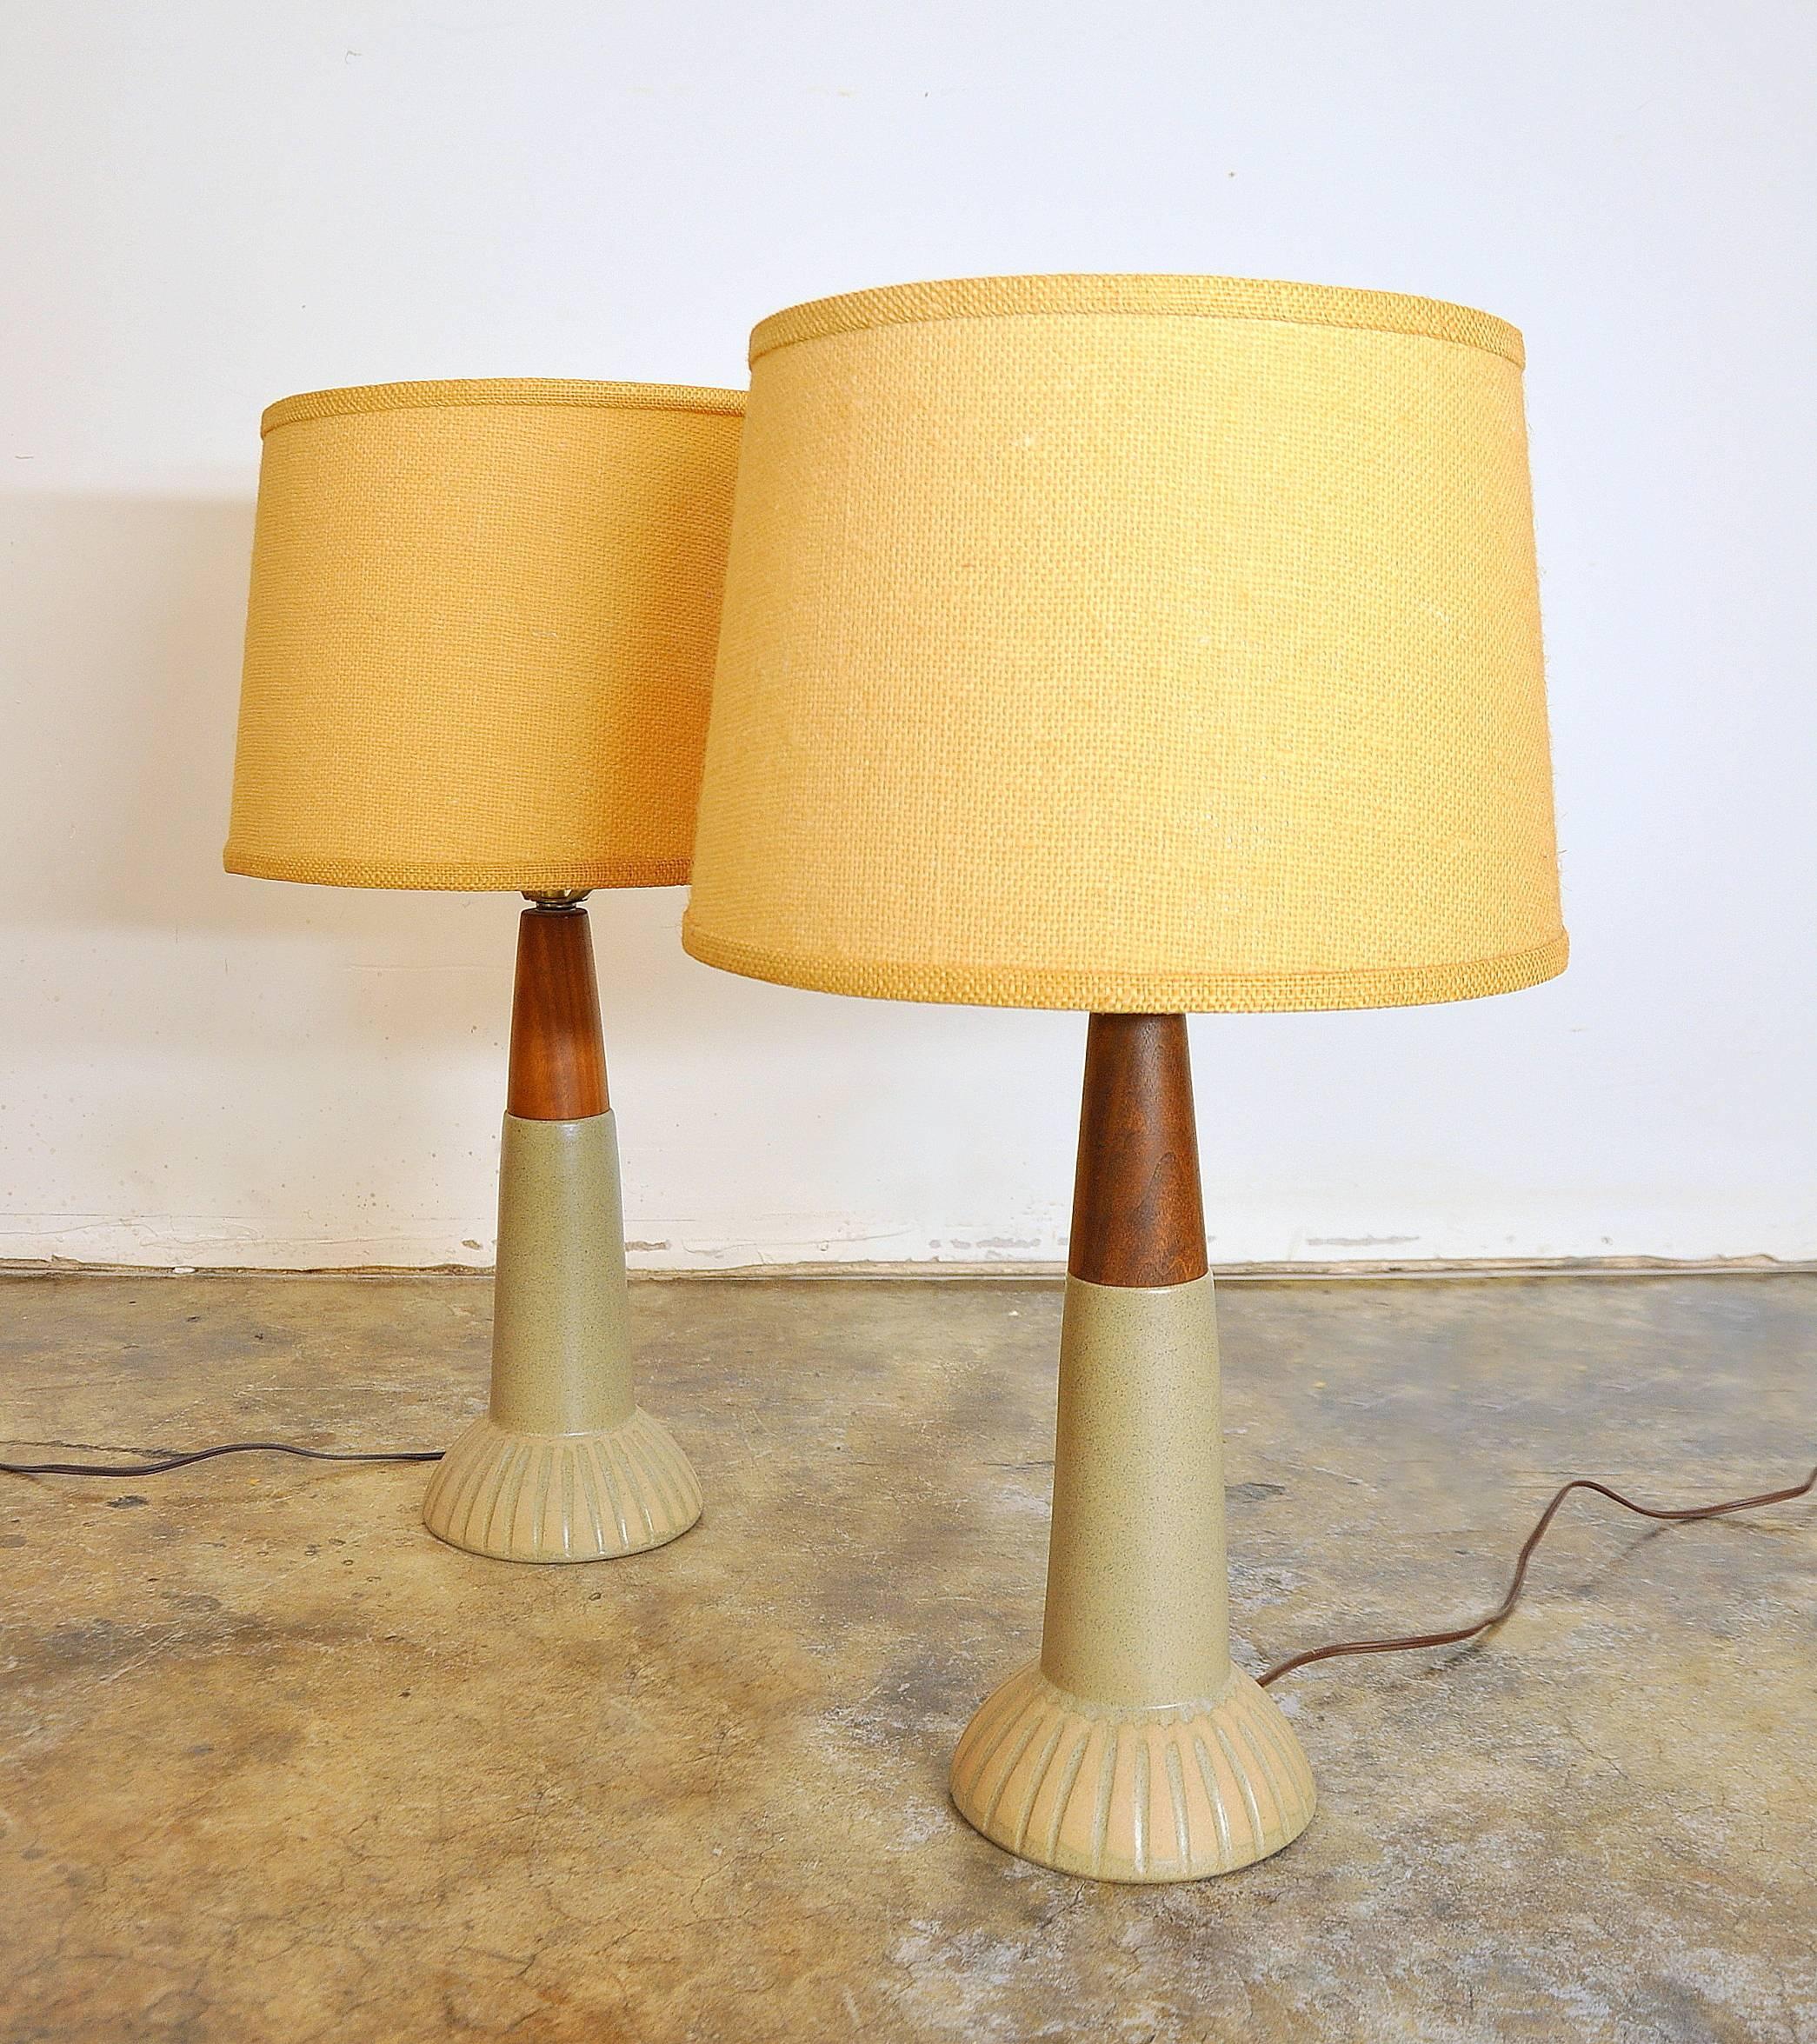 Stylish mid-century modern studio pottery glazed ceramic table lamps with unglazed linear accented saucer shaped bases, in typical Martz fashion. The hand speckled signature stoneware finish meets exquisitely sculpted walnut necks with a glistening